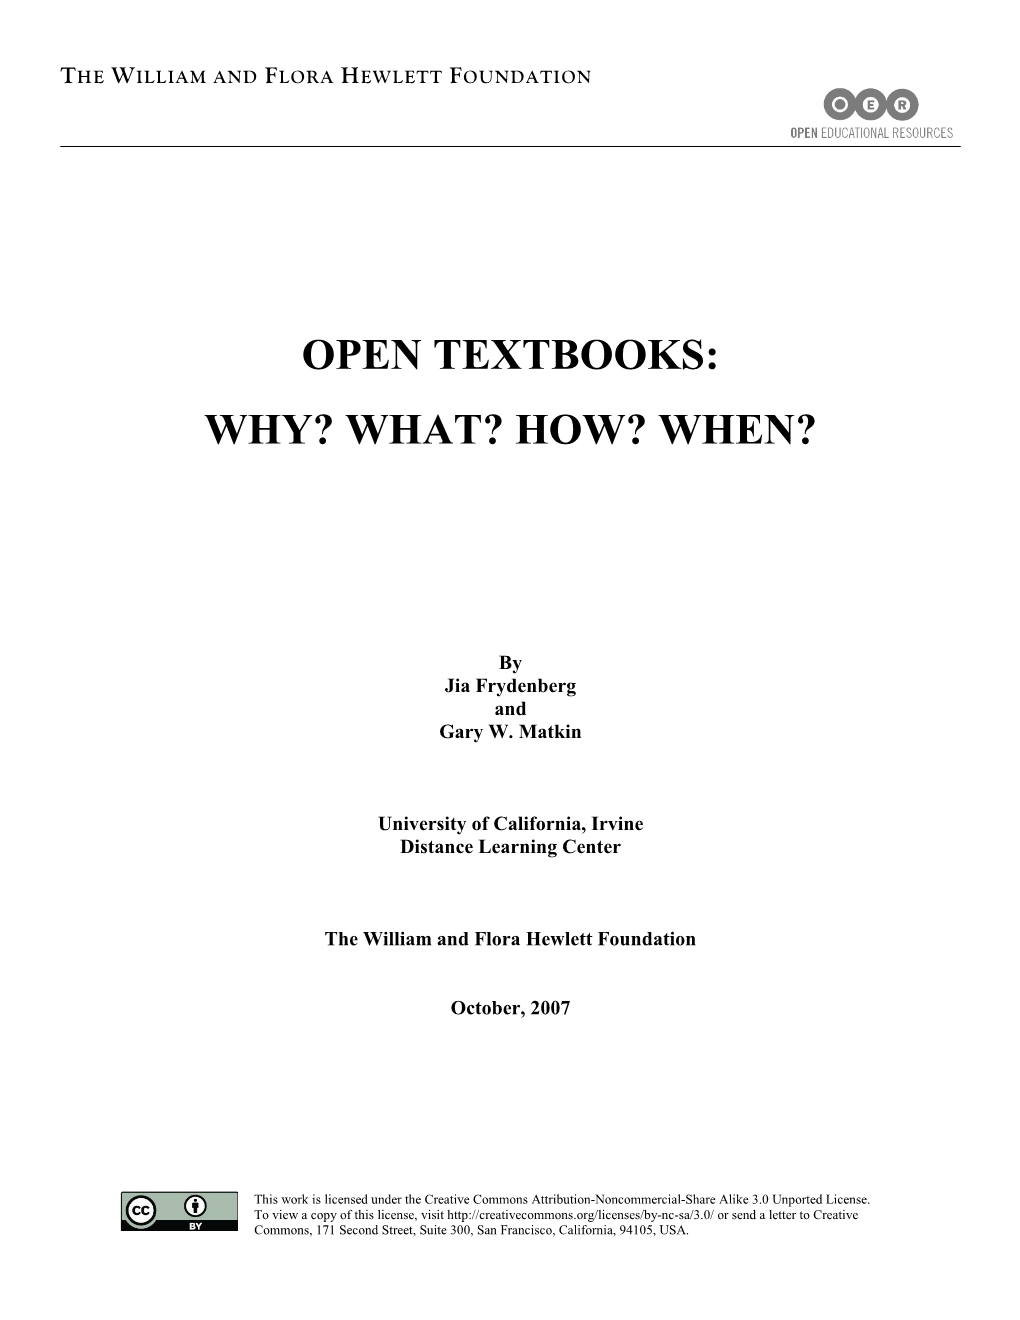 Open Textbooks: Why? What? How? When?